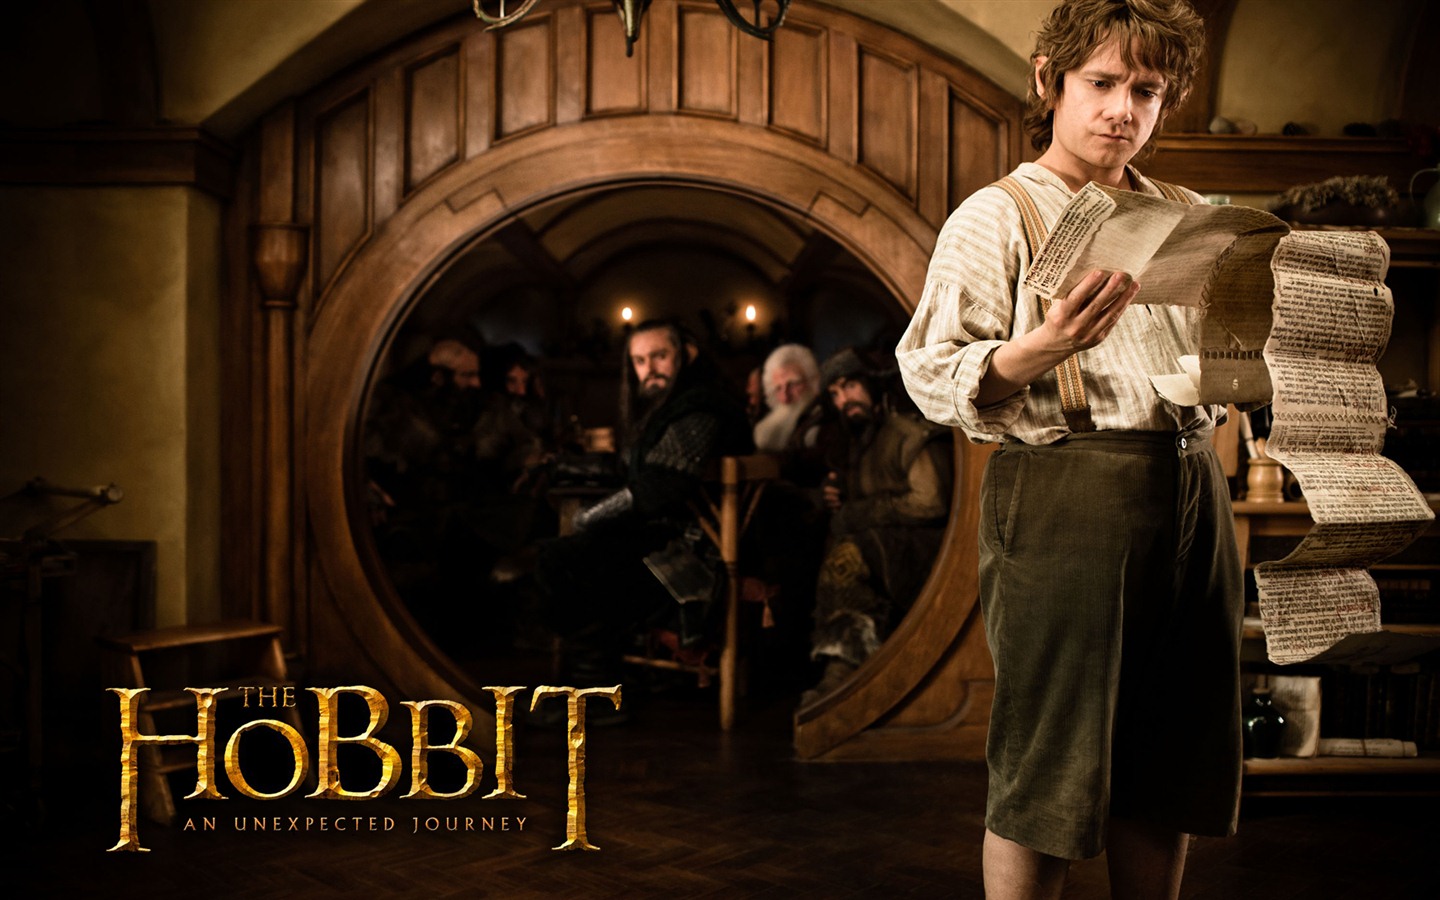 The Hobbit: An Unexpected Journey HD wallpapers #11 - 1440x900